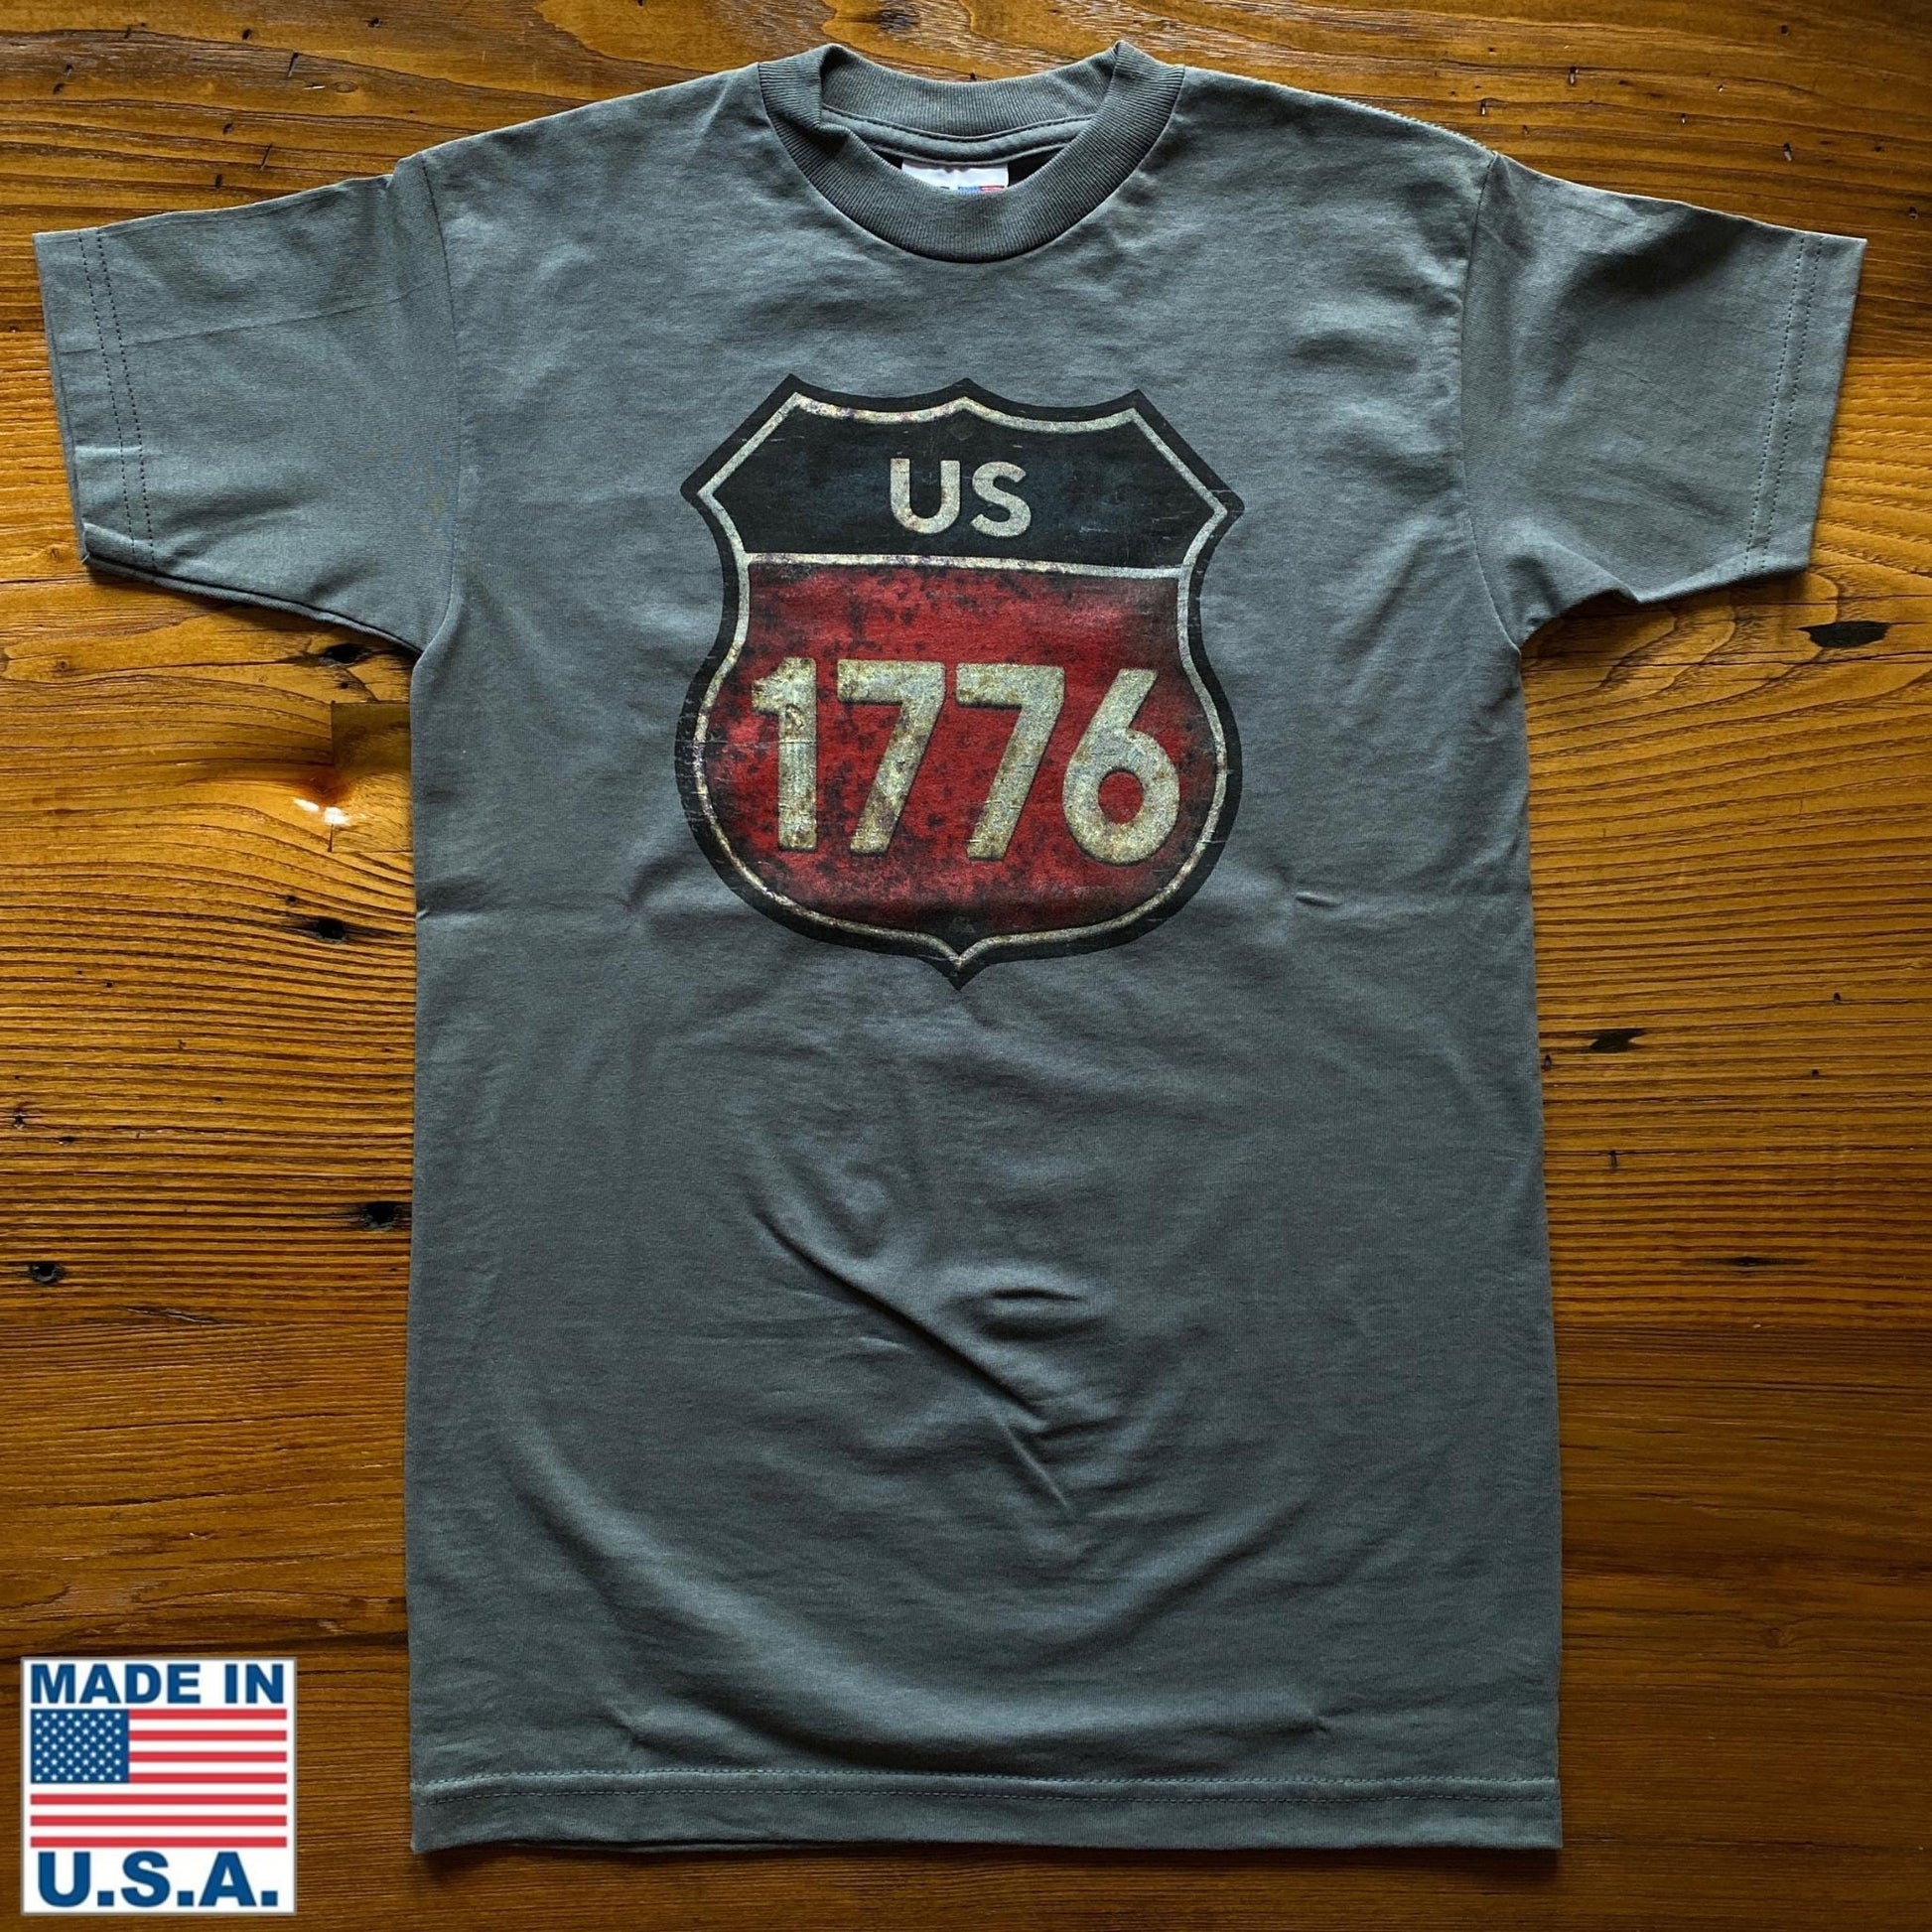 "Route 1776" T-shirt – Historic Road Trip Shirt from The History List Store